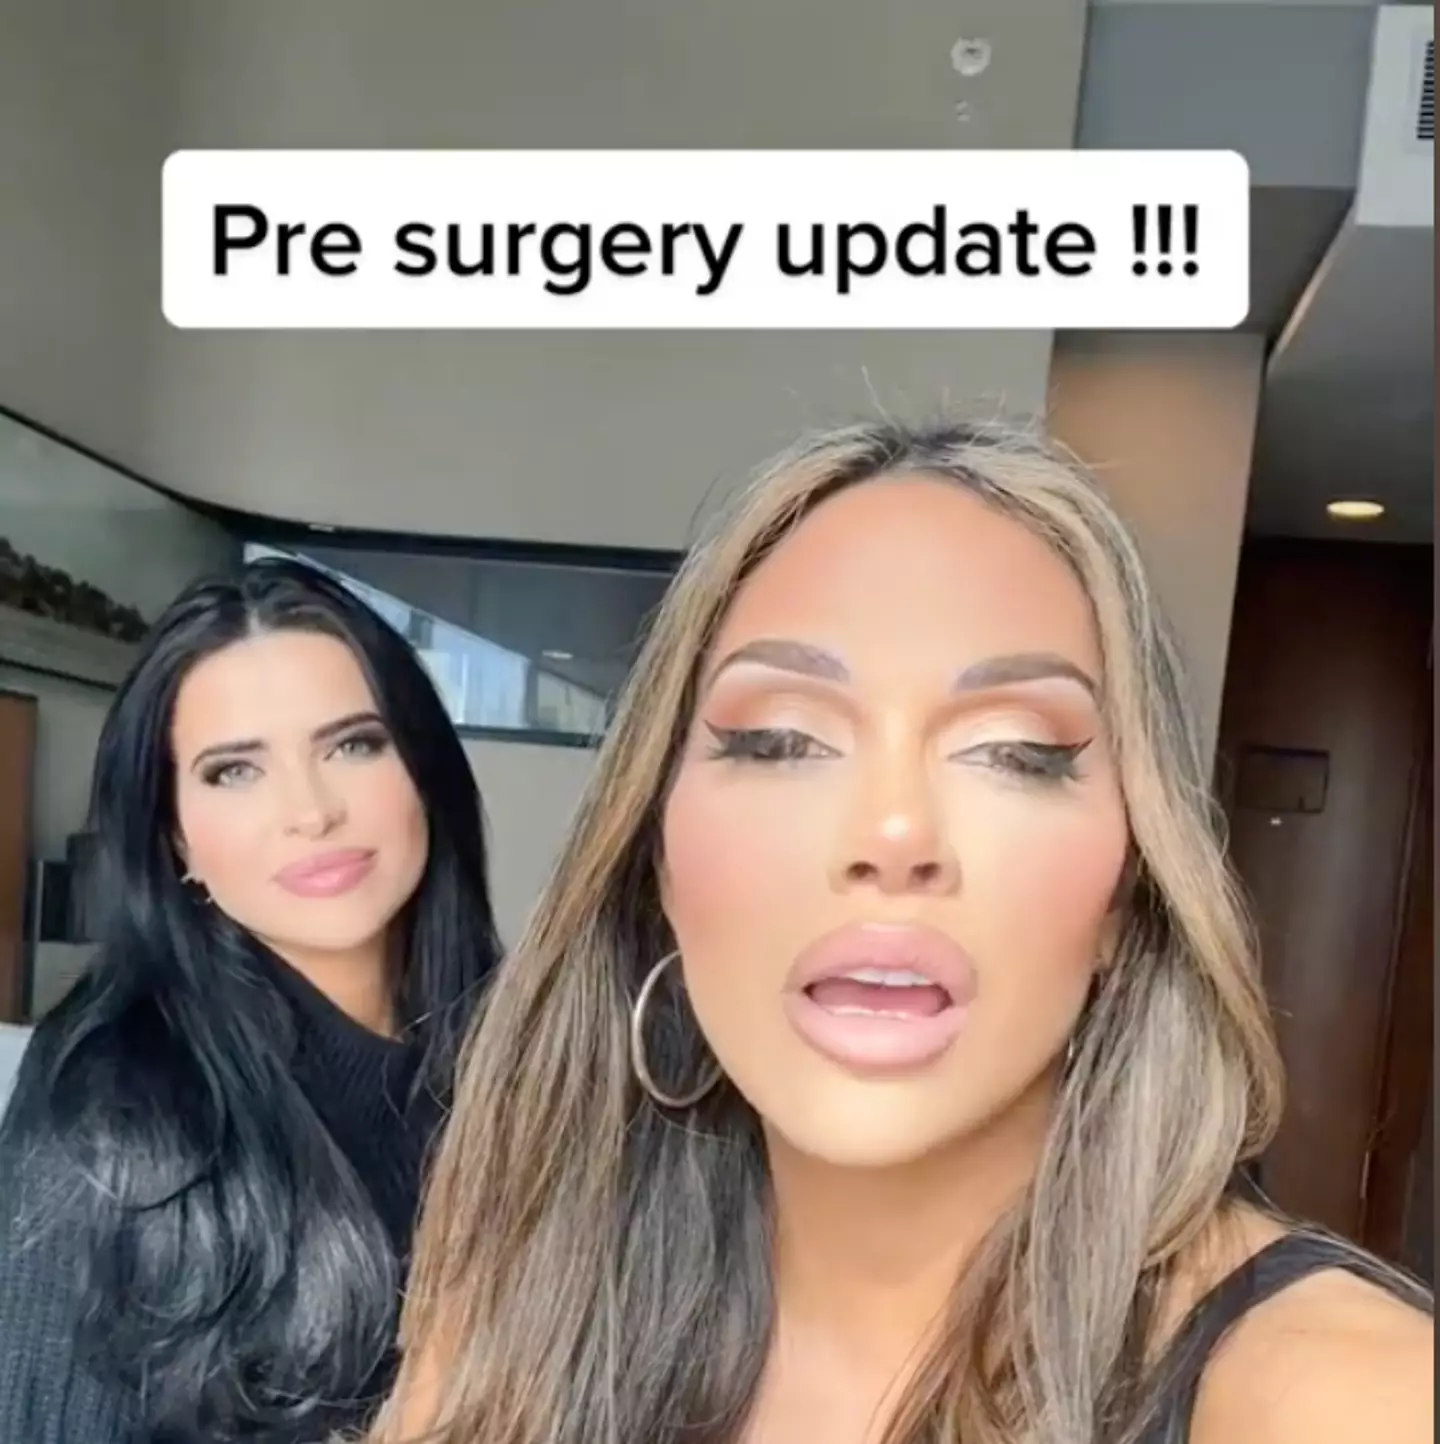 Nasrin gave fans a final look at her face before going under the knife.